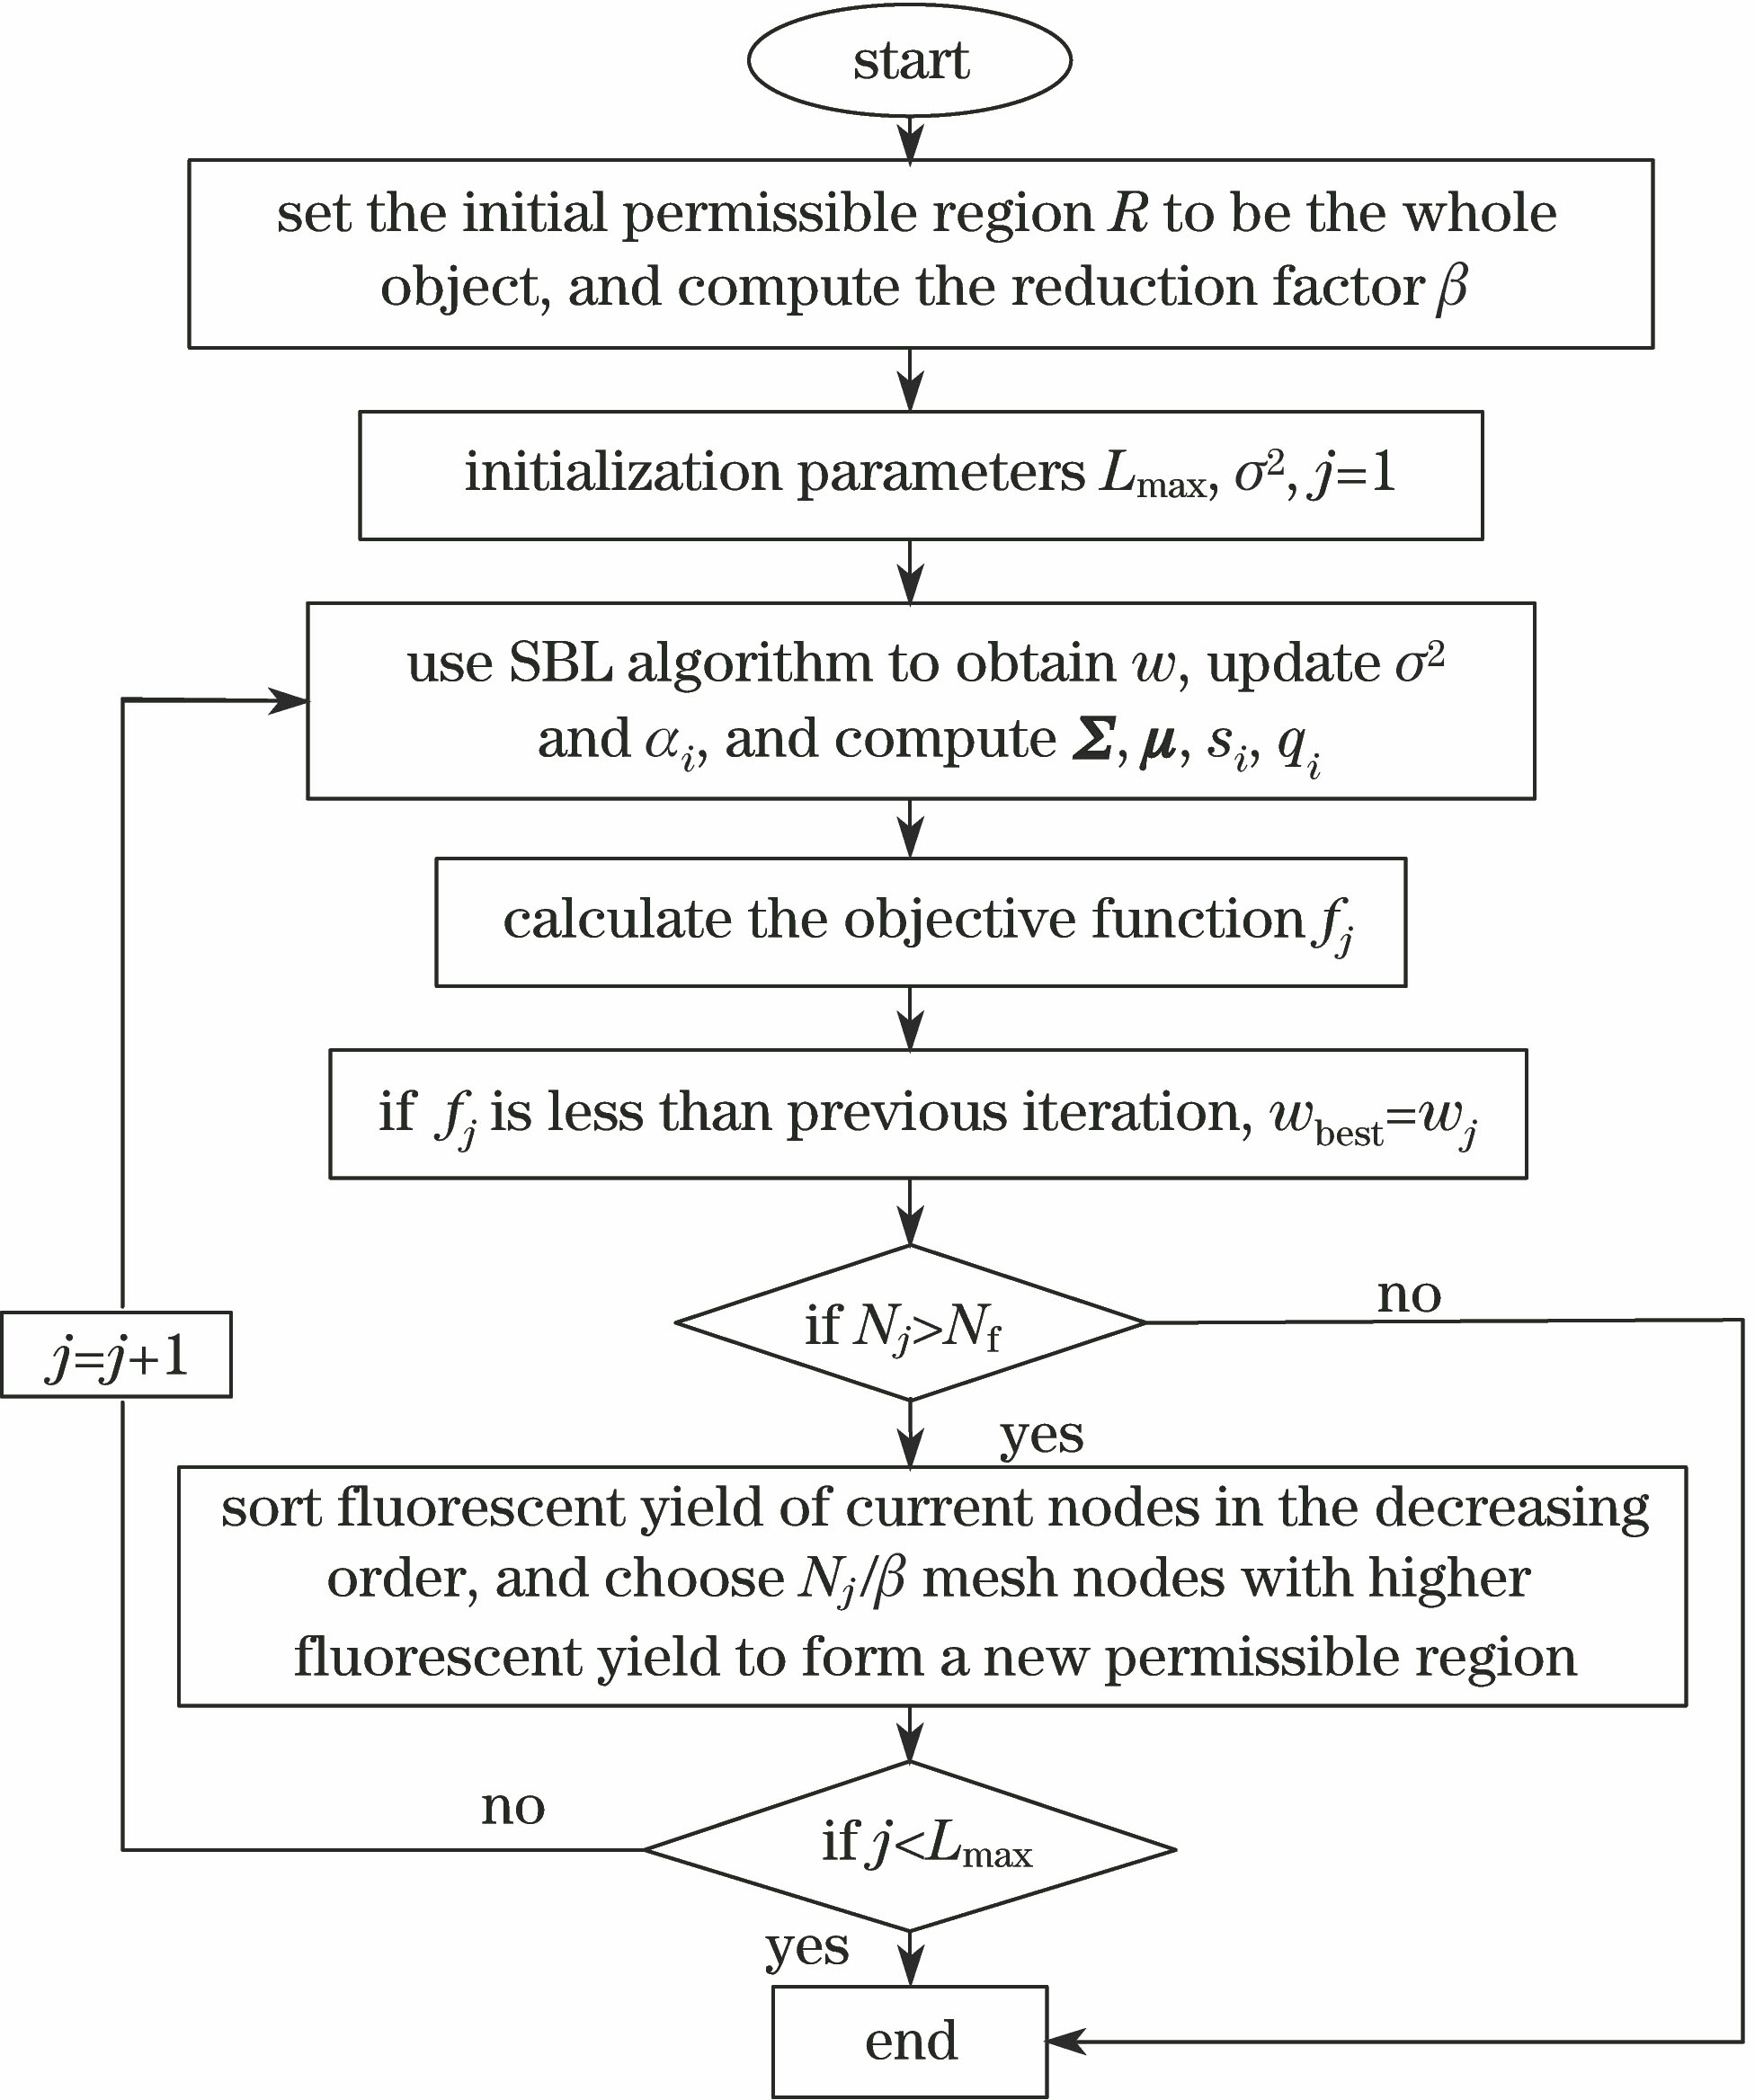 SBL algorithm combined with iterative-shrinking permissible region strategy